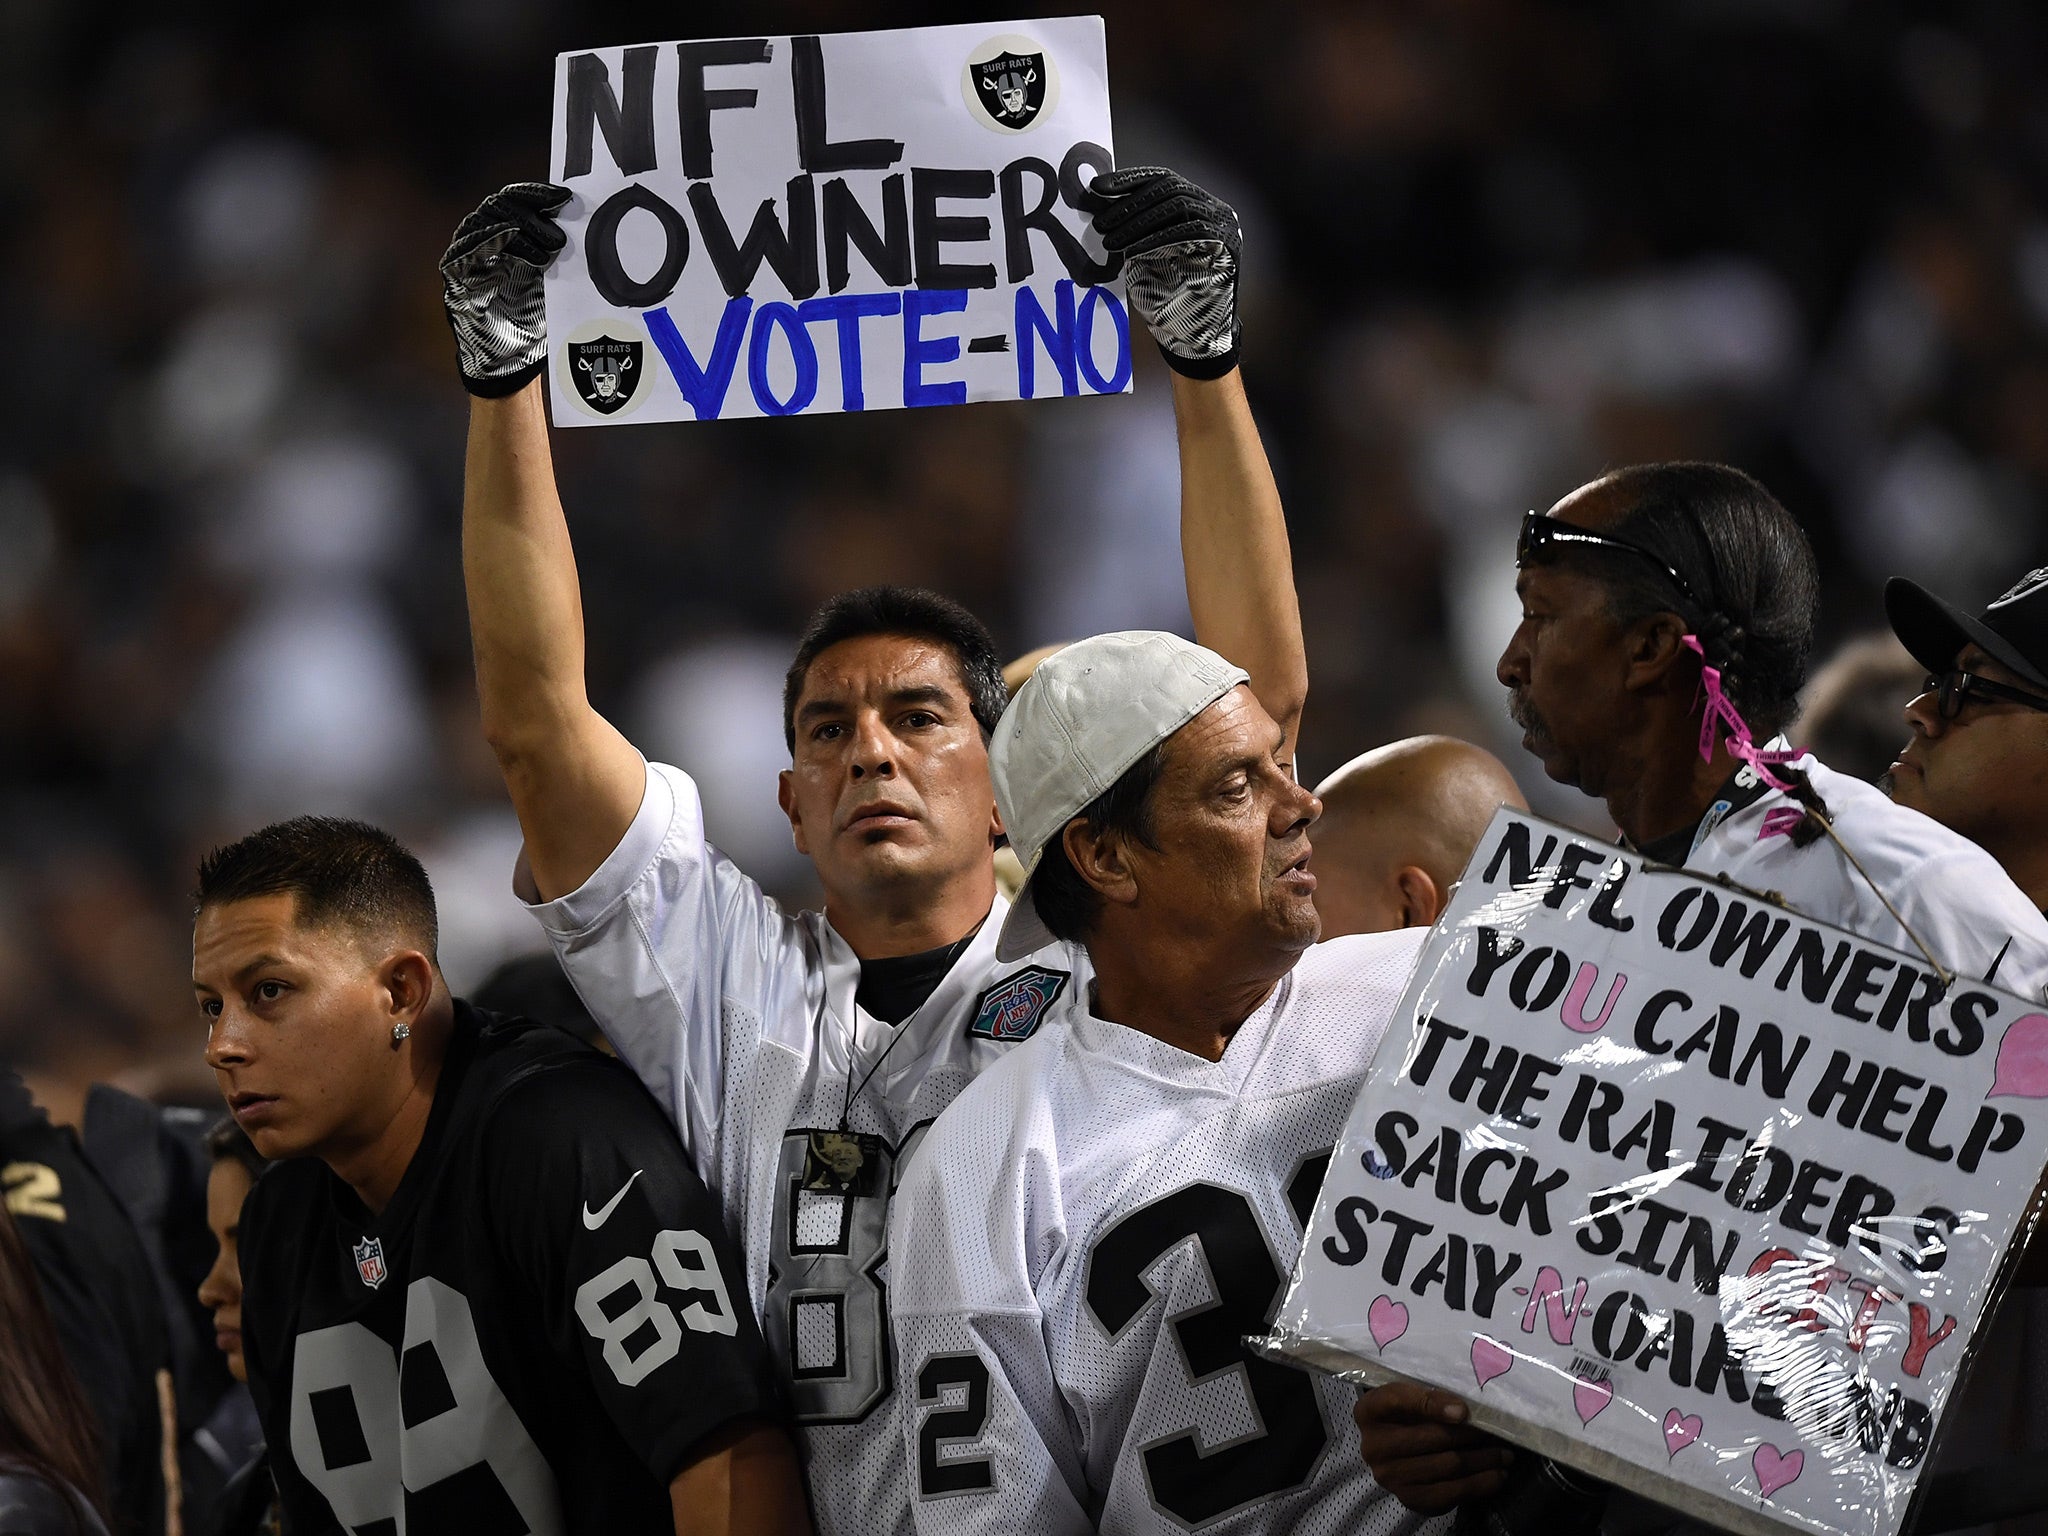 Oakland Raiders supporters have launched protests against proposals to relocate the team in recent months